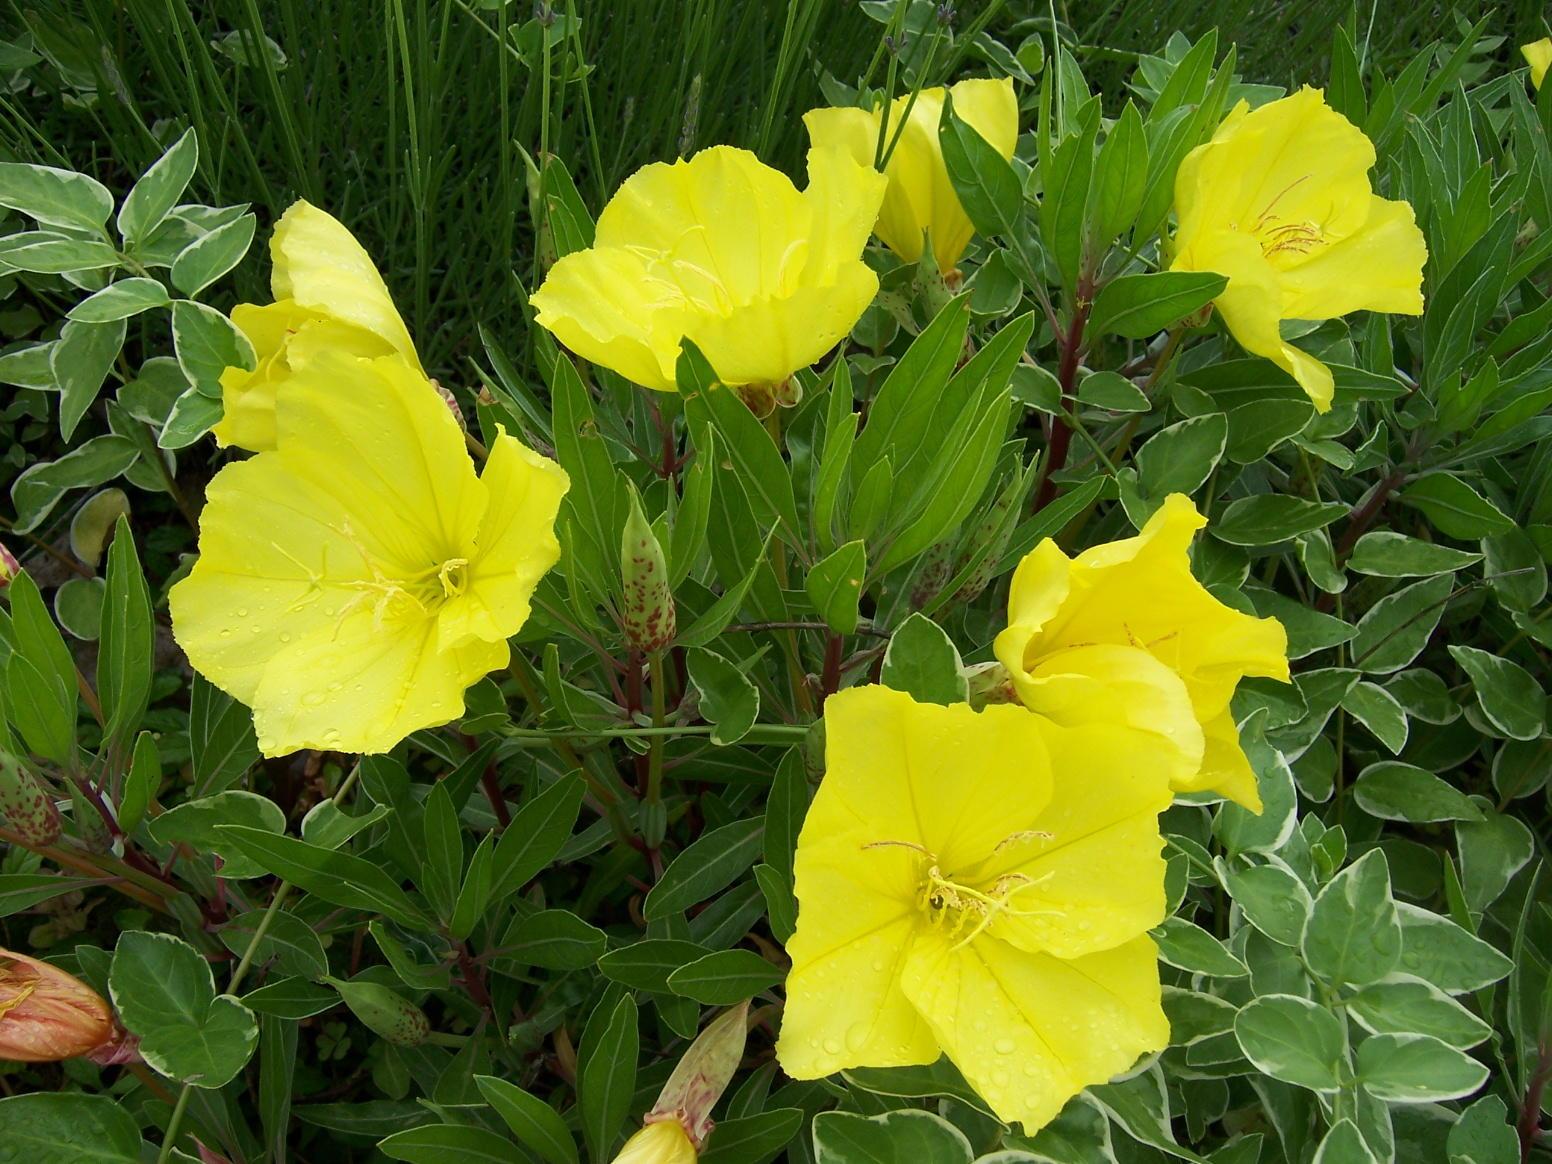 Yellow cup-shaped evening primrose flowers.